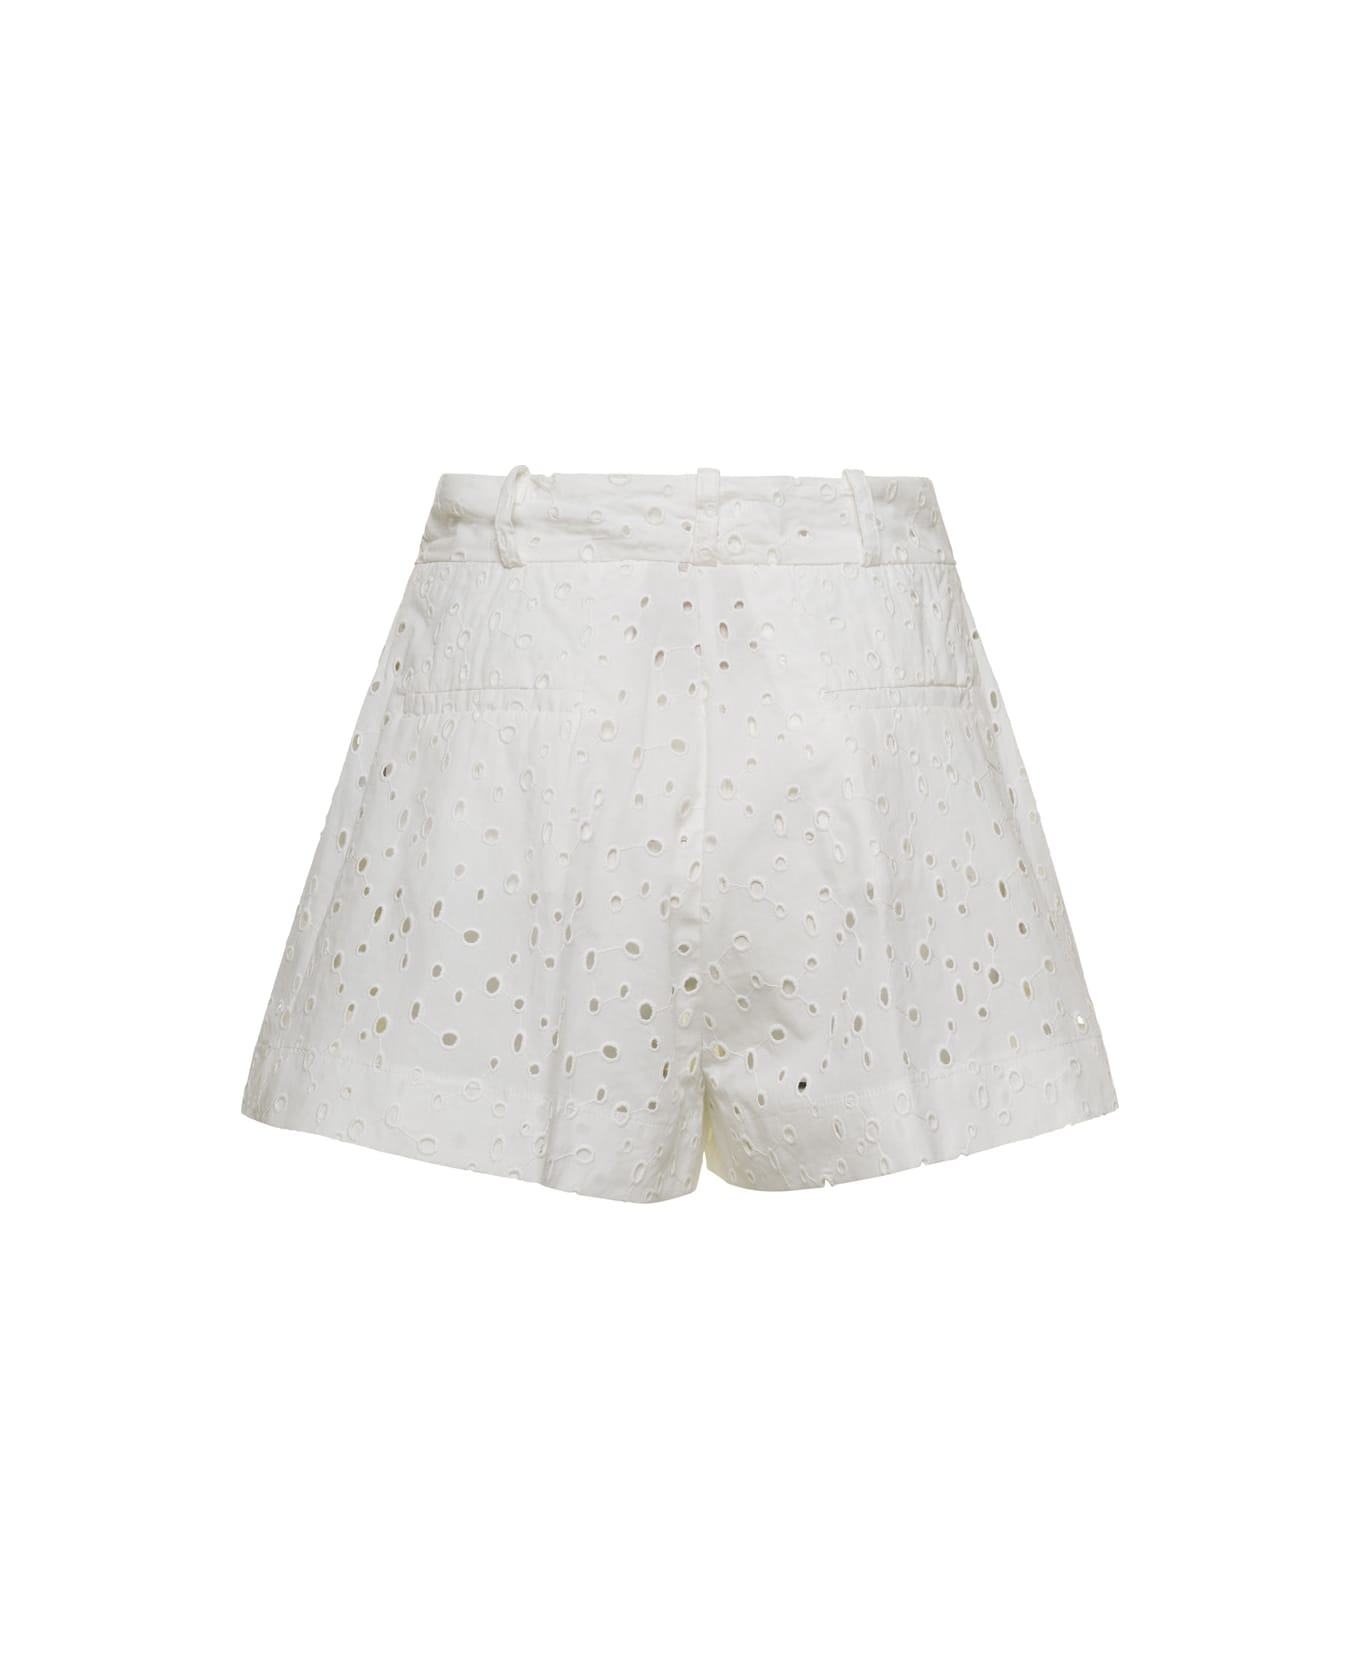 SEMICOUTURE White Broderie Anglaise Shorts In Cotton Blend Woman - White ショートパンツ